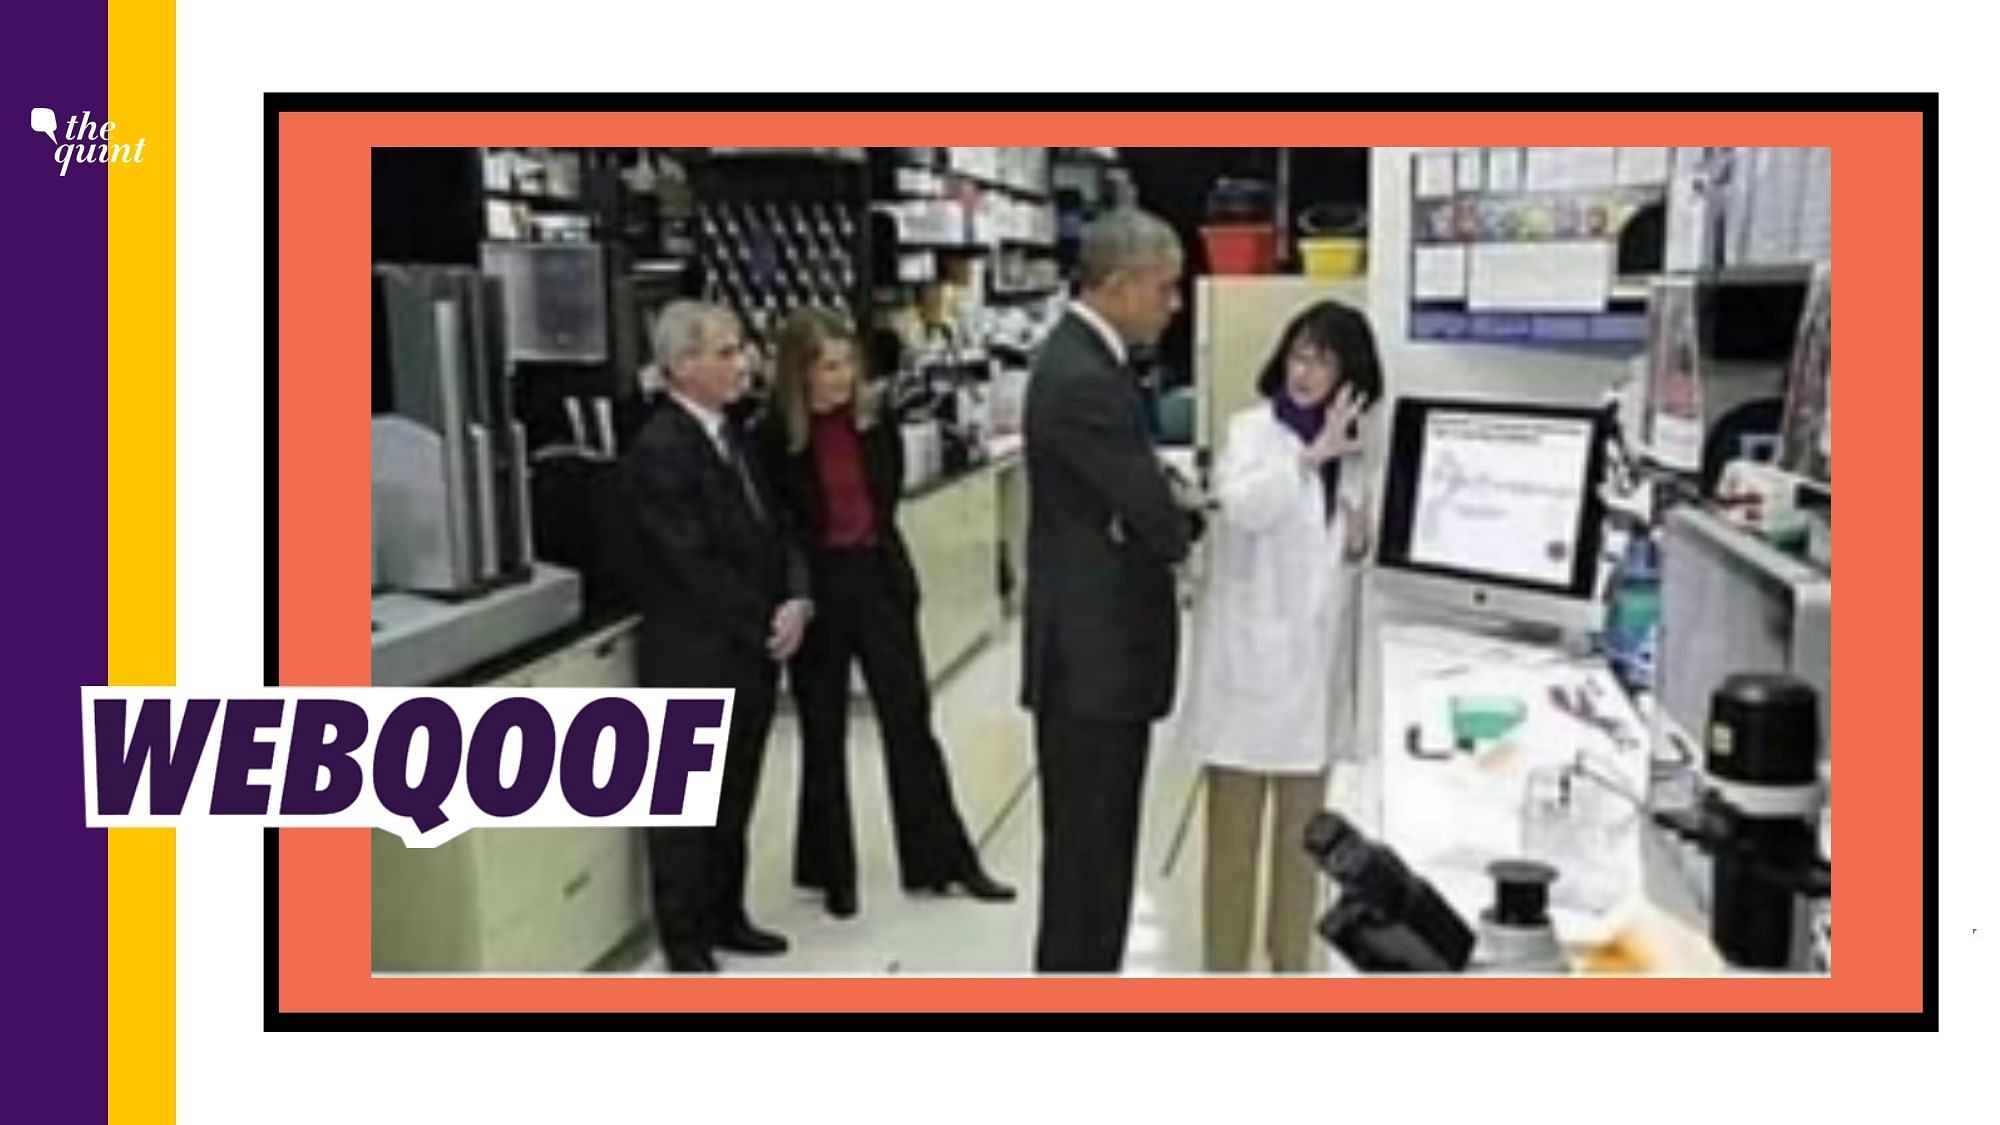 A 2014 image featuring Barack Obama with Dr Fauci is being circulated with false claims.